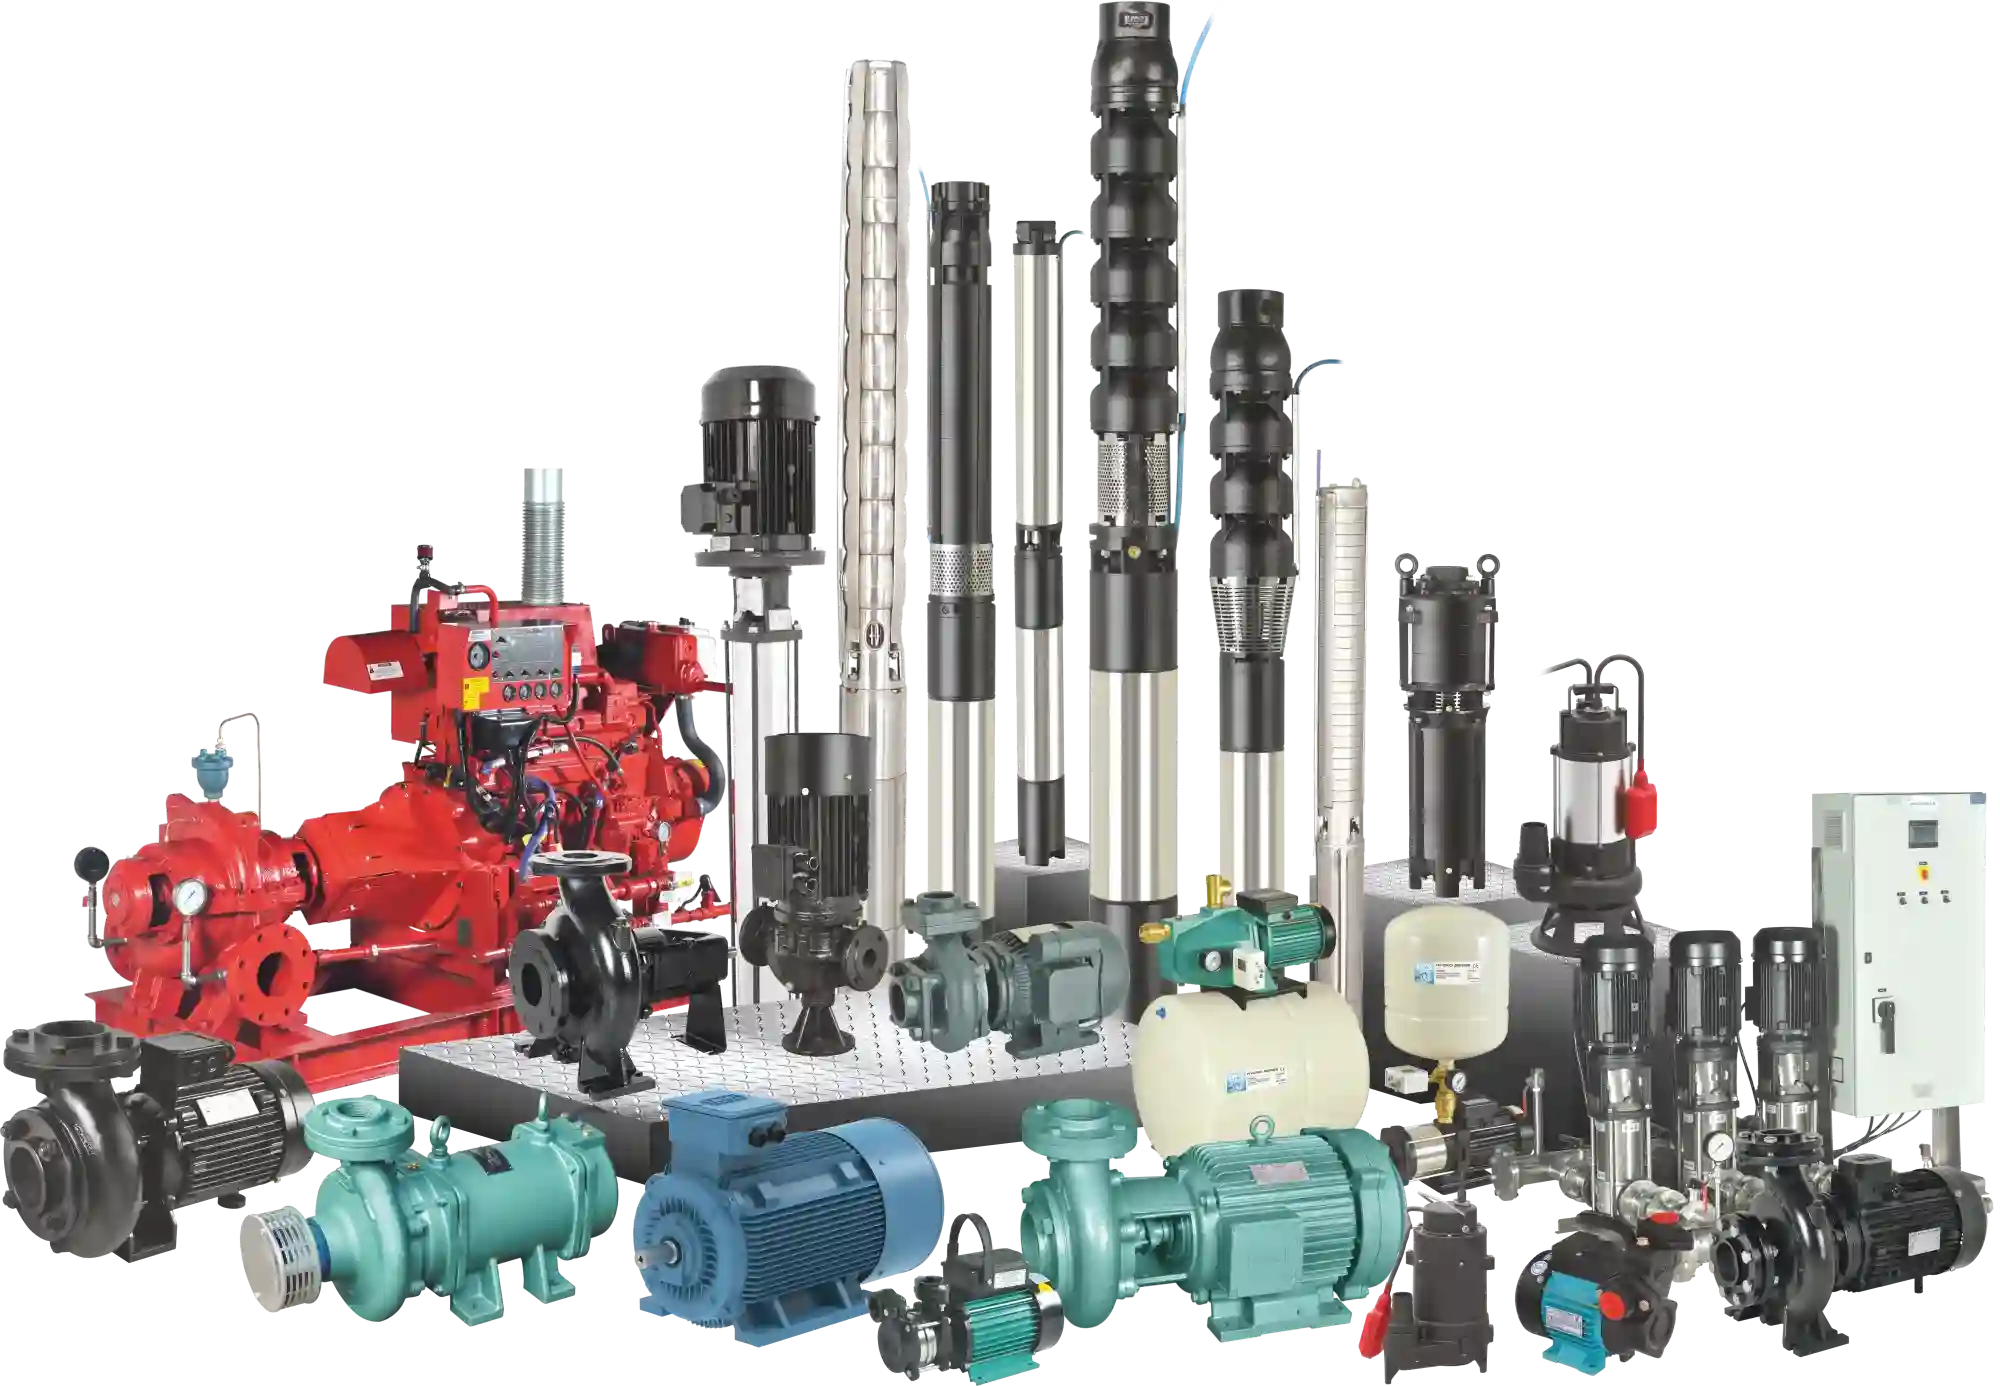 Submersible Pump - Lubi Submersible Pump Manufacturer from Ahmedabad